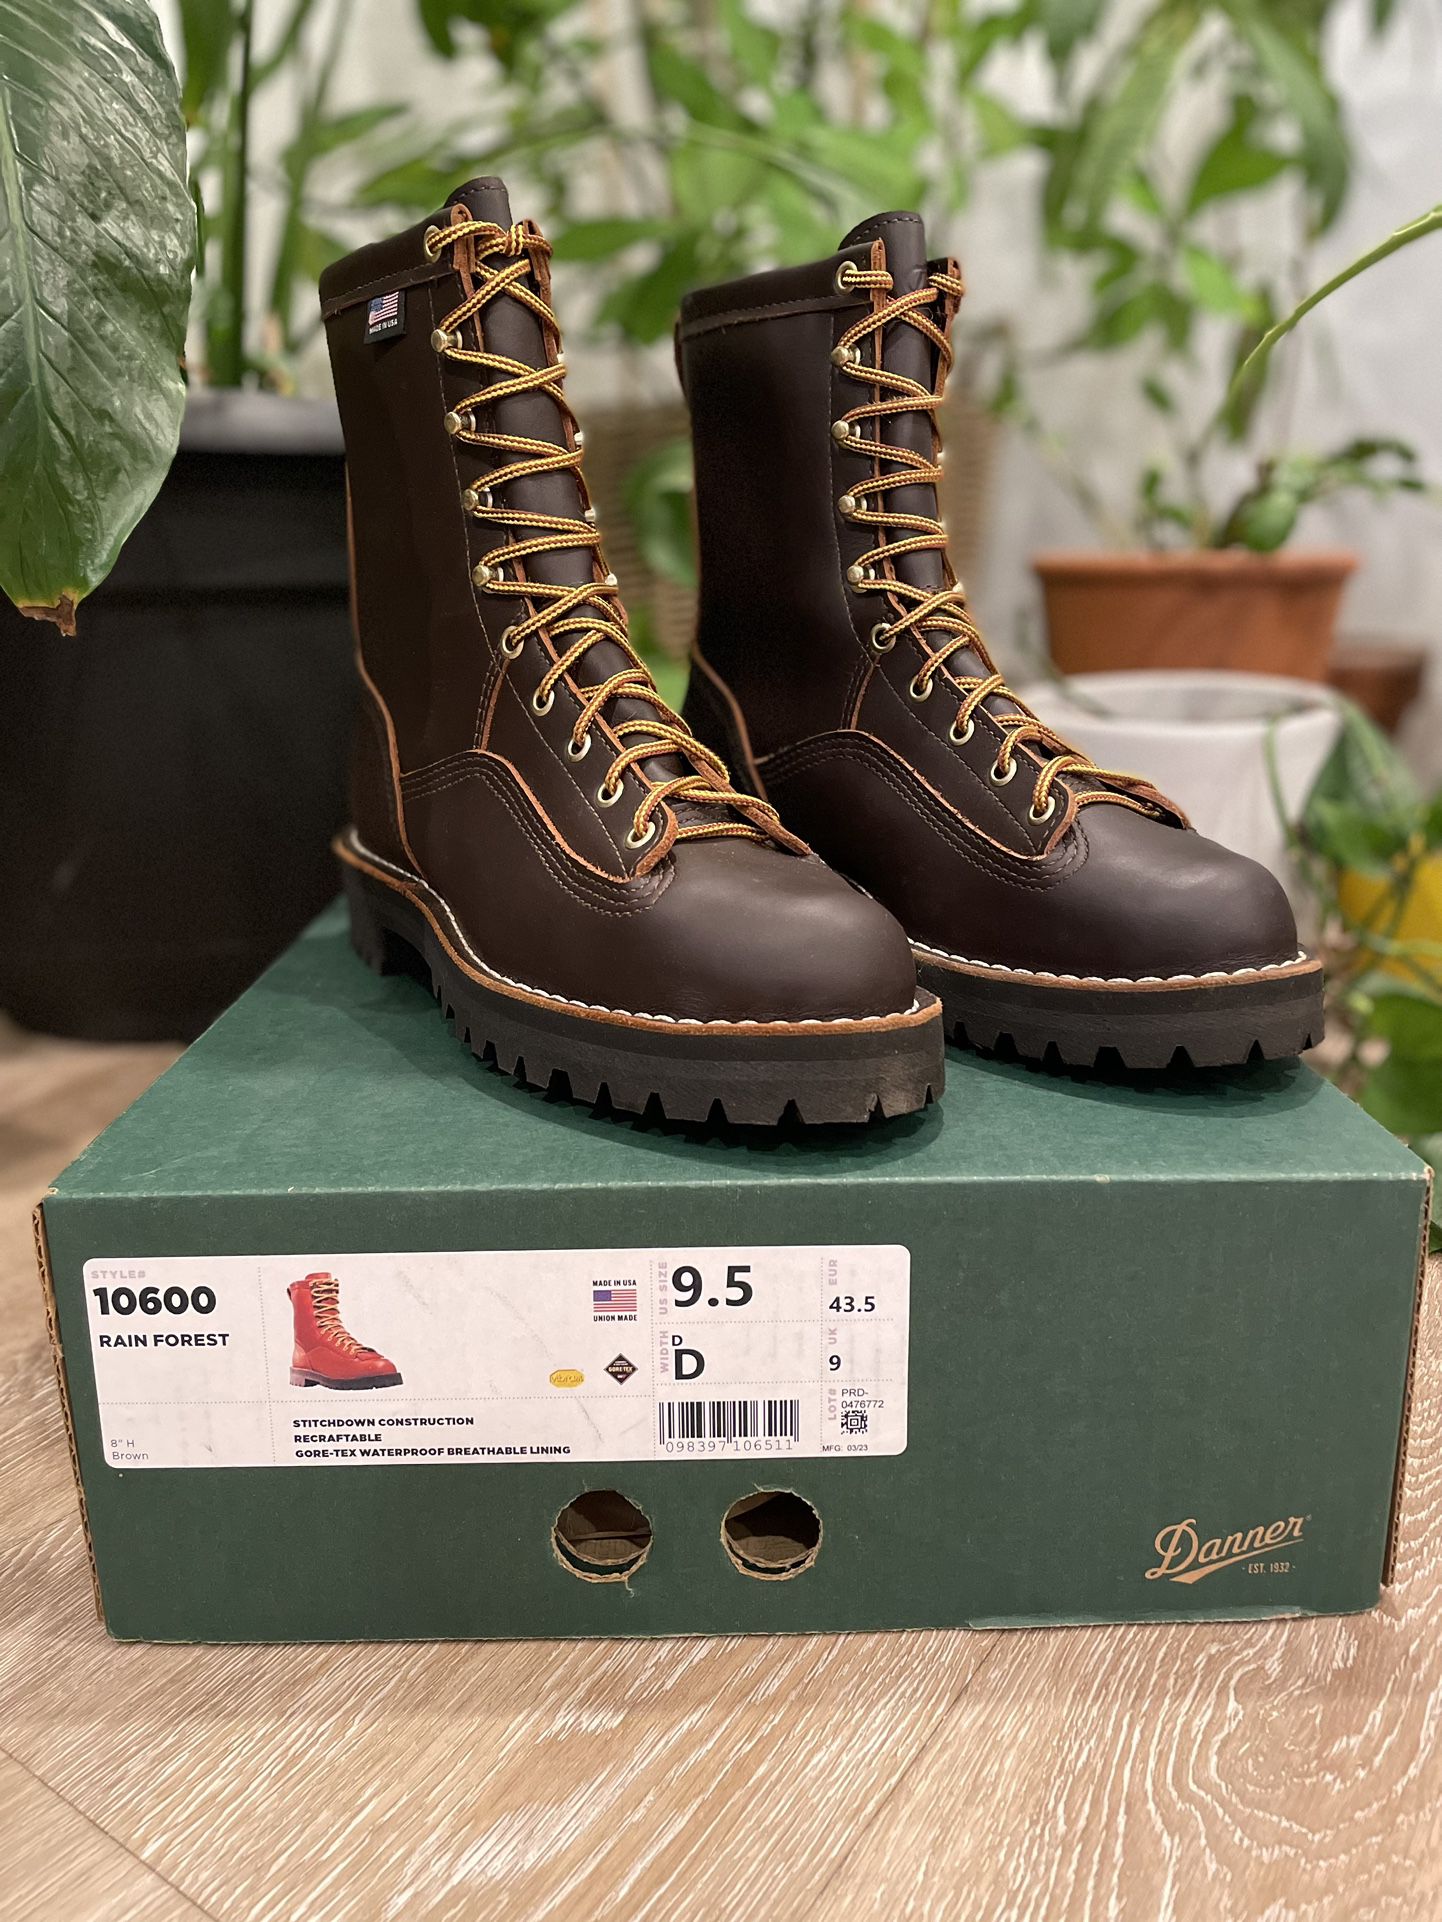 NEW IN BOX Danner rain Forest Boot 8” Brown